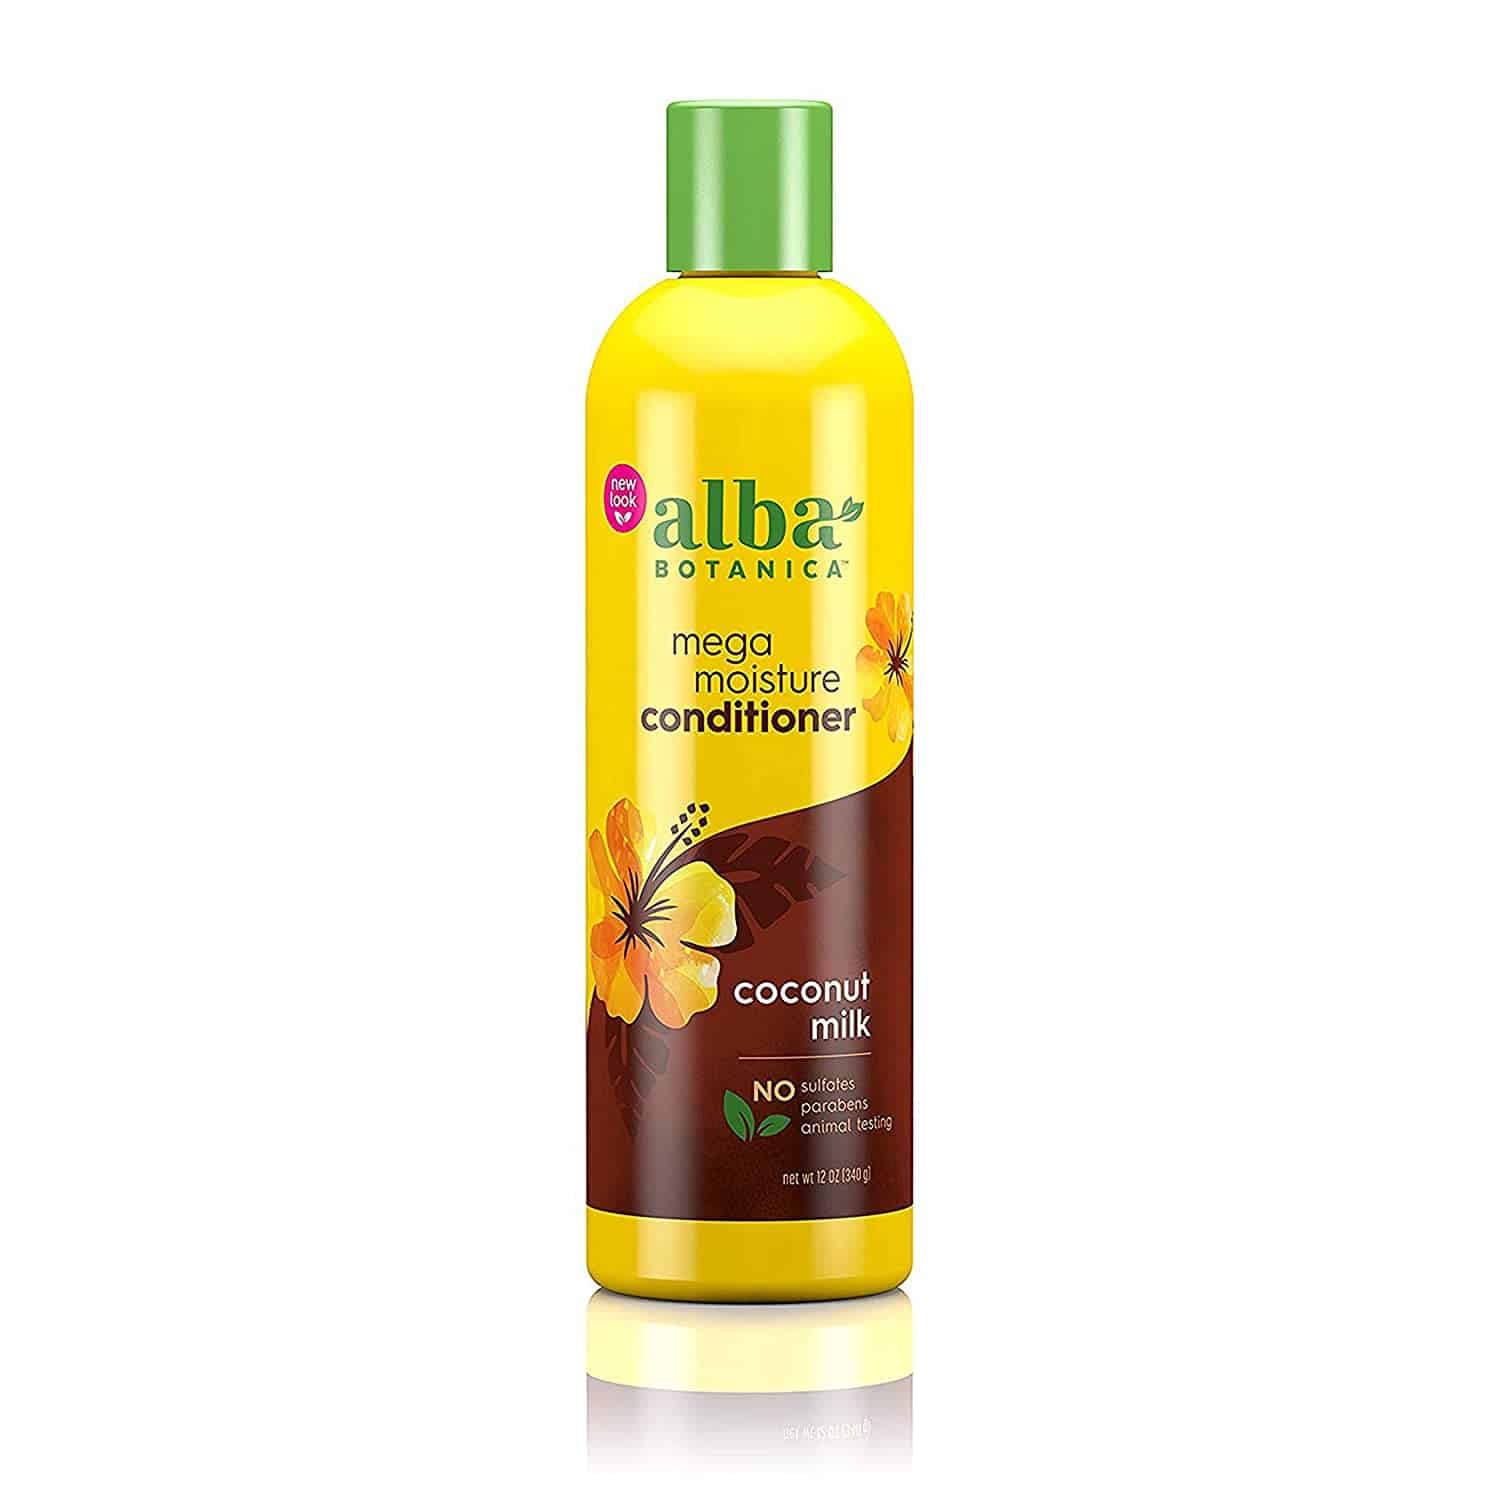 Alba Botanica Drink It Up Coconut Milk Hawaiian Conditioner, Yellow , 12 oz. (Allow for 3 - 4 days Shipping)